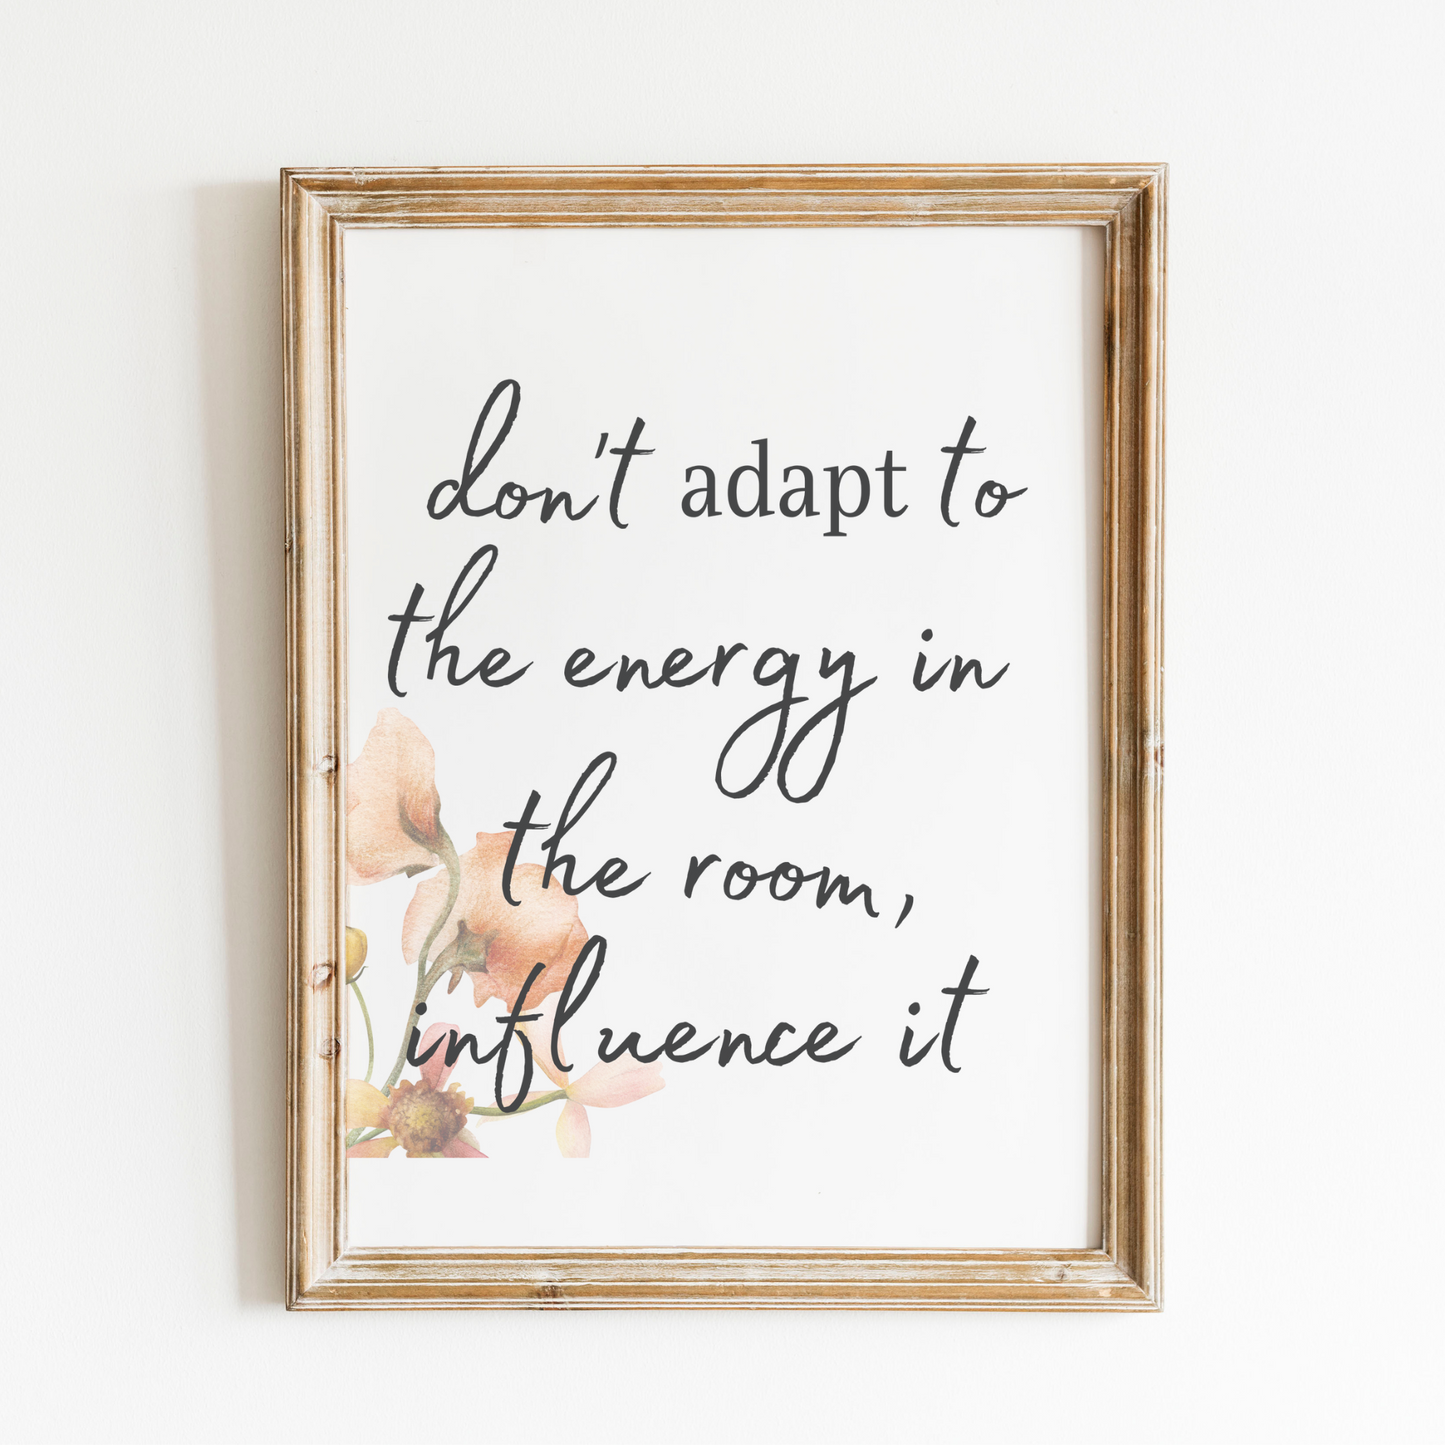 Quotes for Friday at work: Don't Adapt to Energy in the Room Self Care Affirmations  Bundle